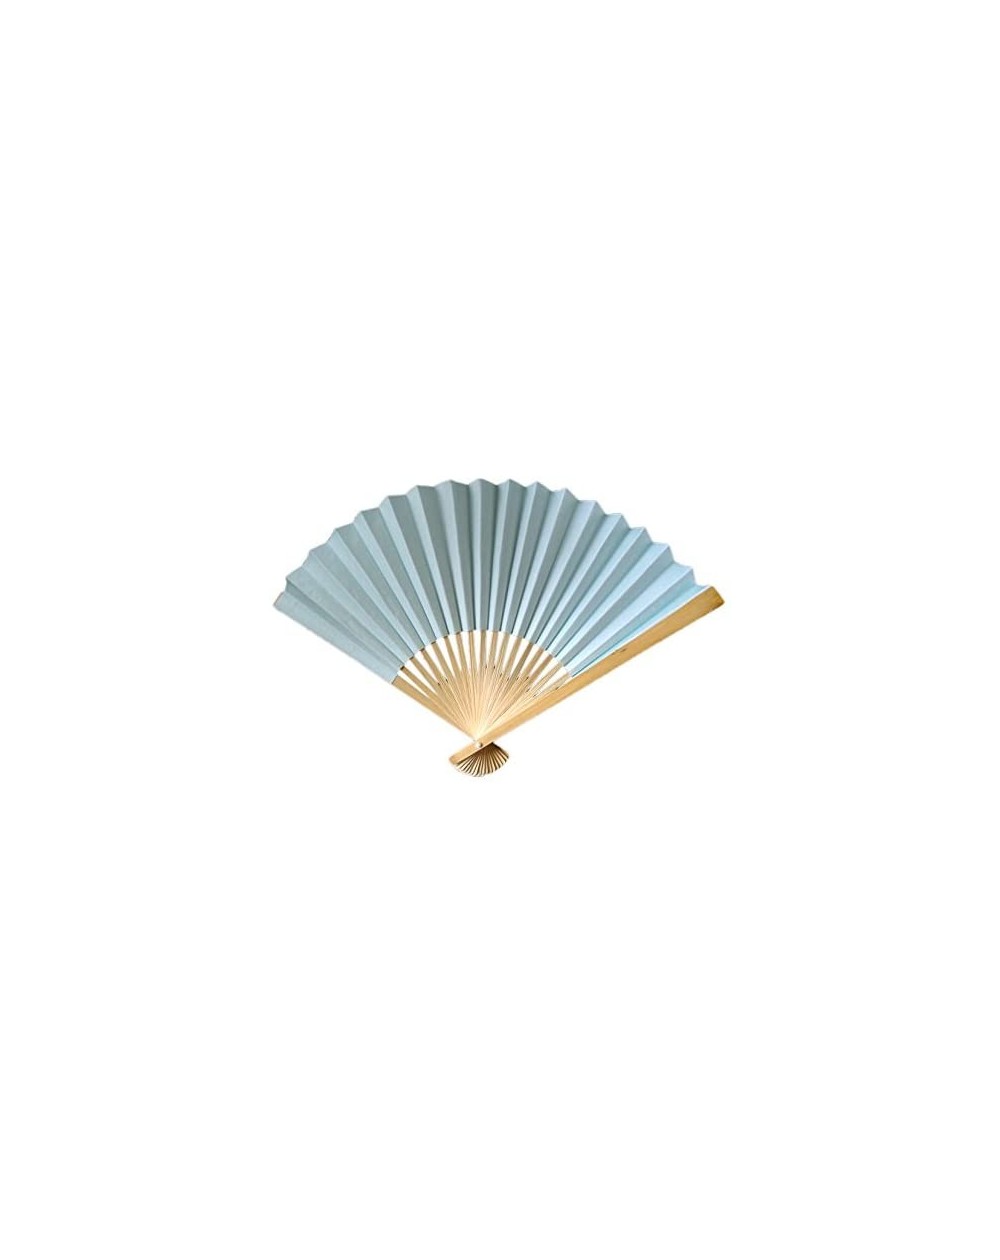 Favors Paper Hand Fans (9-Inch Premium- Arctic Spa Blue- 10-Pack) - Ideal for Wedding and Party Favors- Gifts- and Decoration...